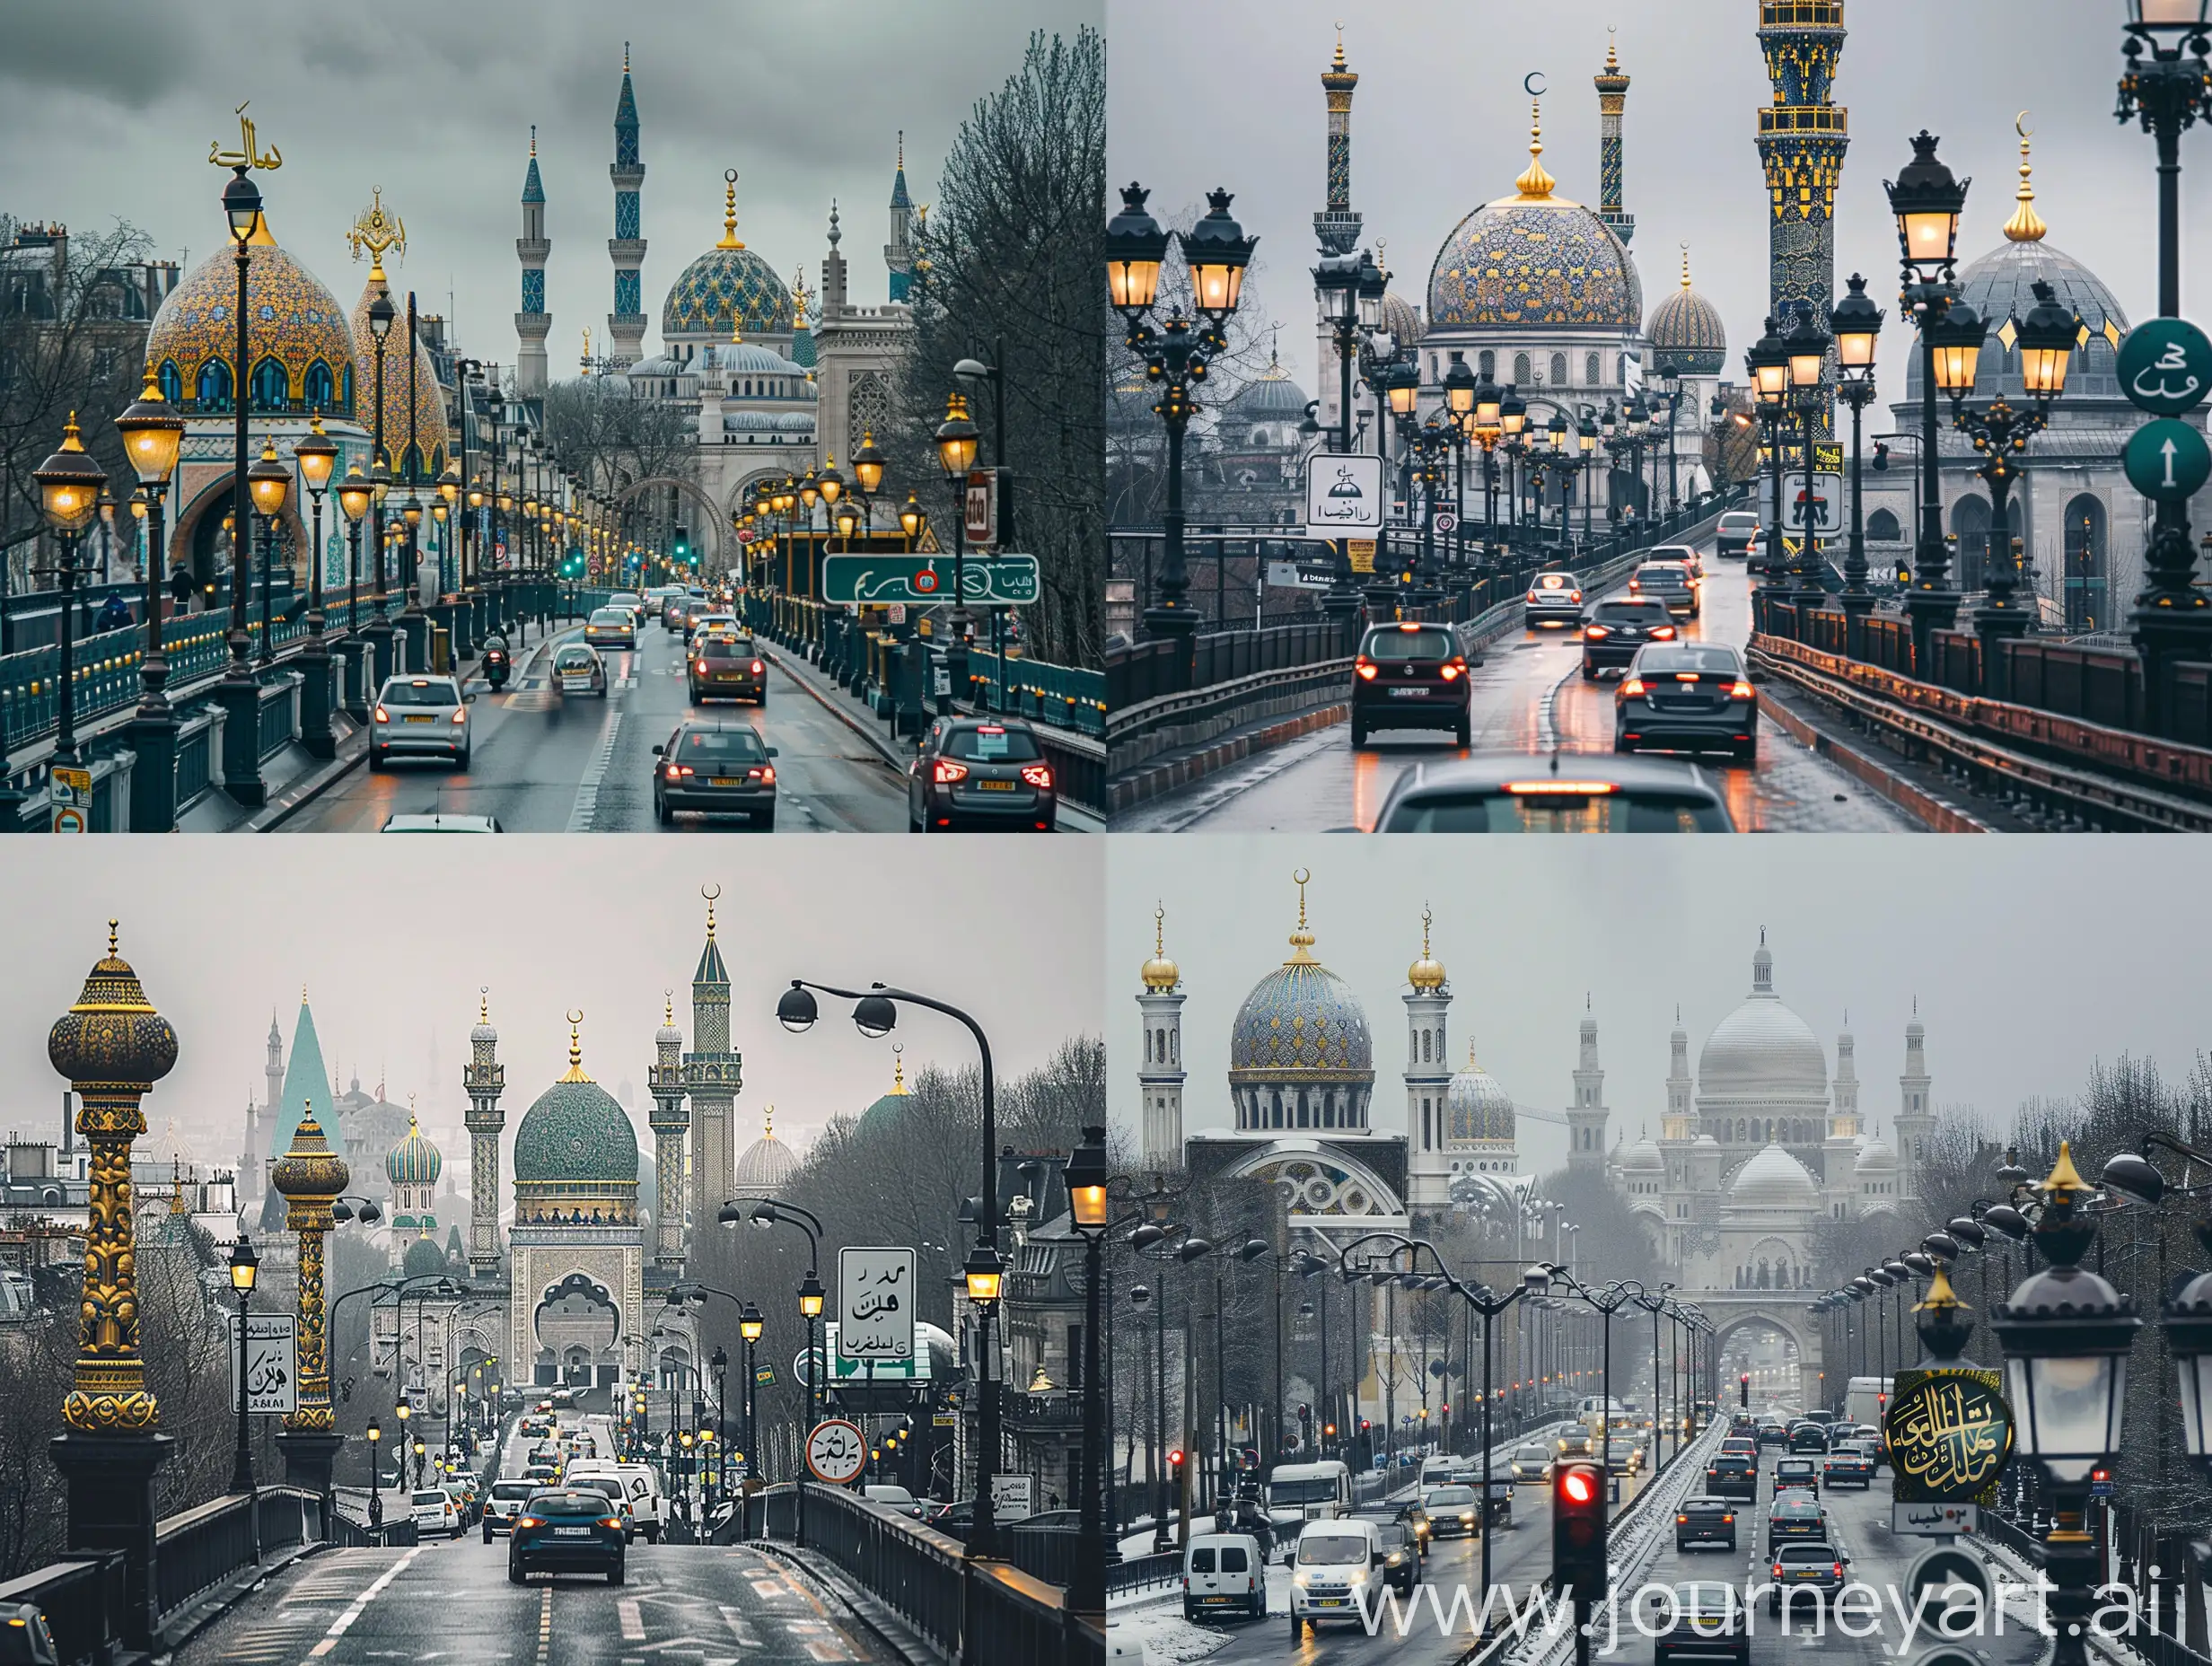 A road of Paris with traffic, full of Islamic architectures having persian tile and golden ornaments, arabian design street lights, porcelain traffic signs and porcelain direction signs, beautiful mosques and islamic buildings, grey weather --ar 4:3